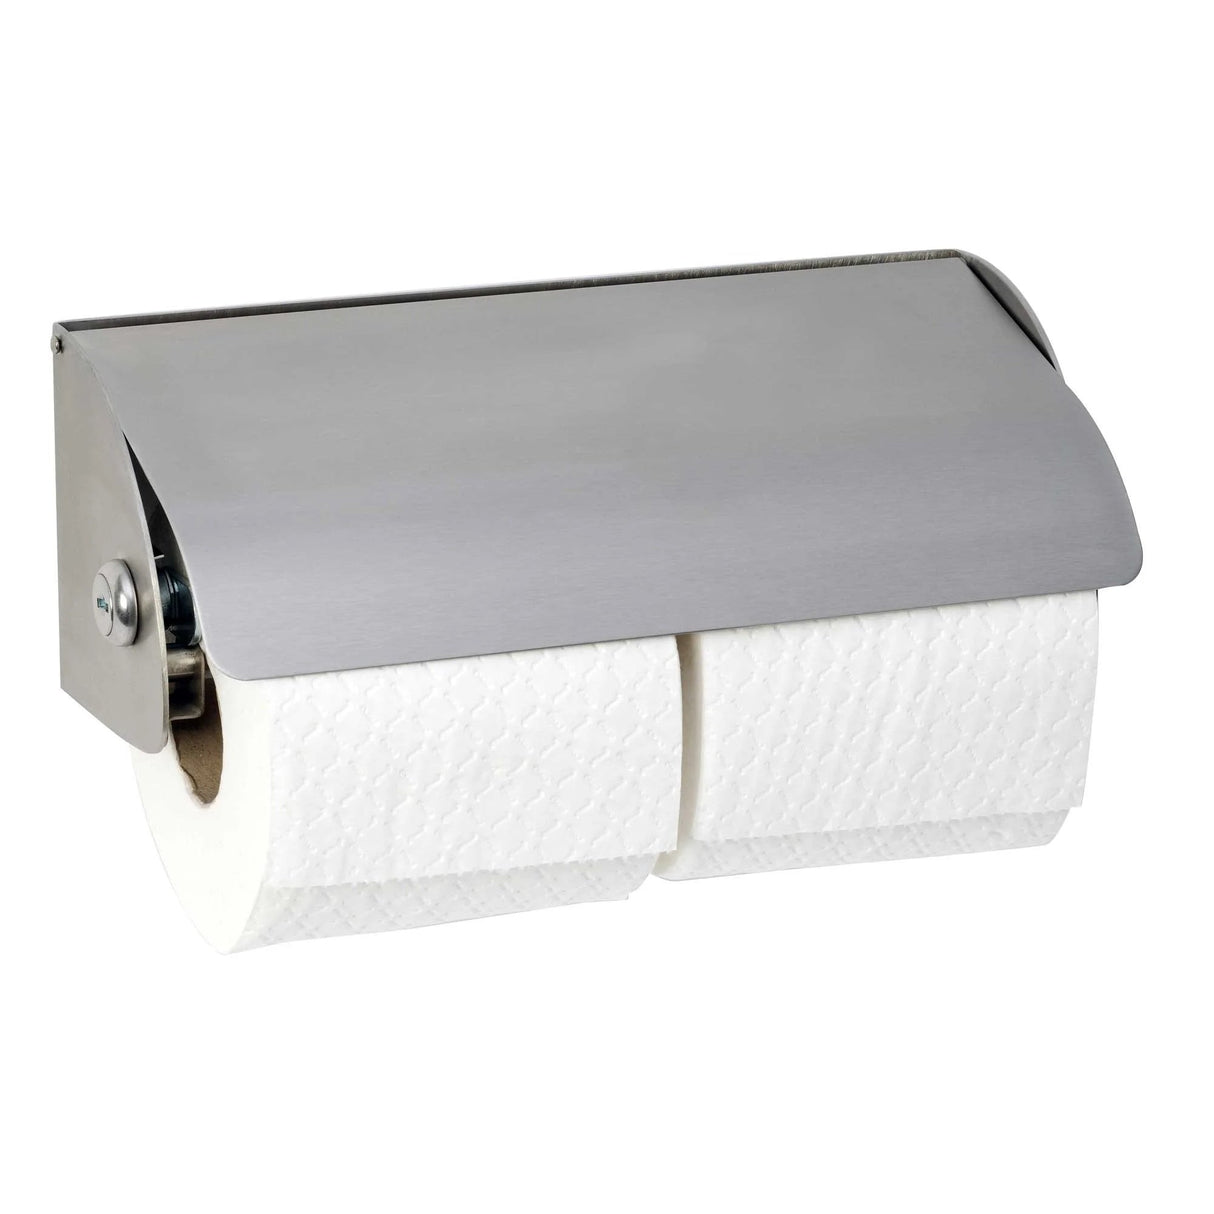 BC267 / BC267B Dolphin Dual Stainless Steel Lockable Toilet Roll Dispenser